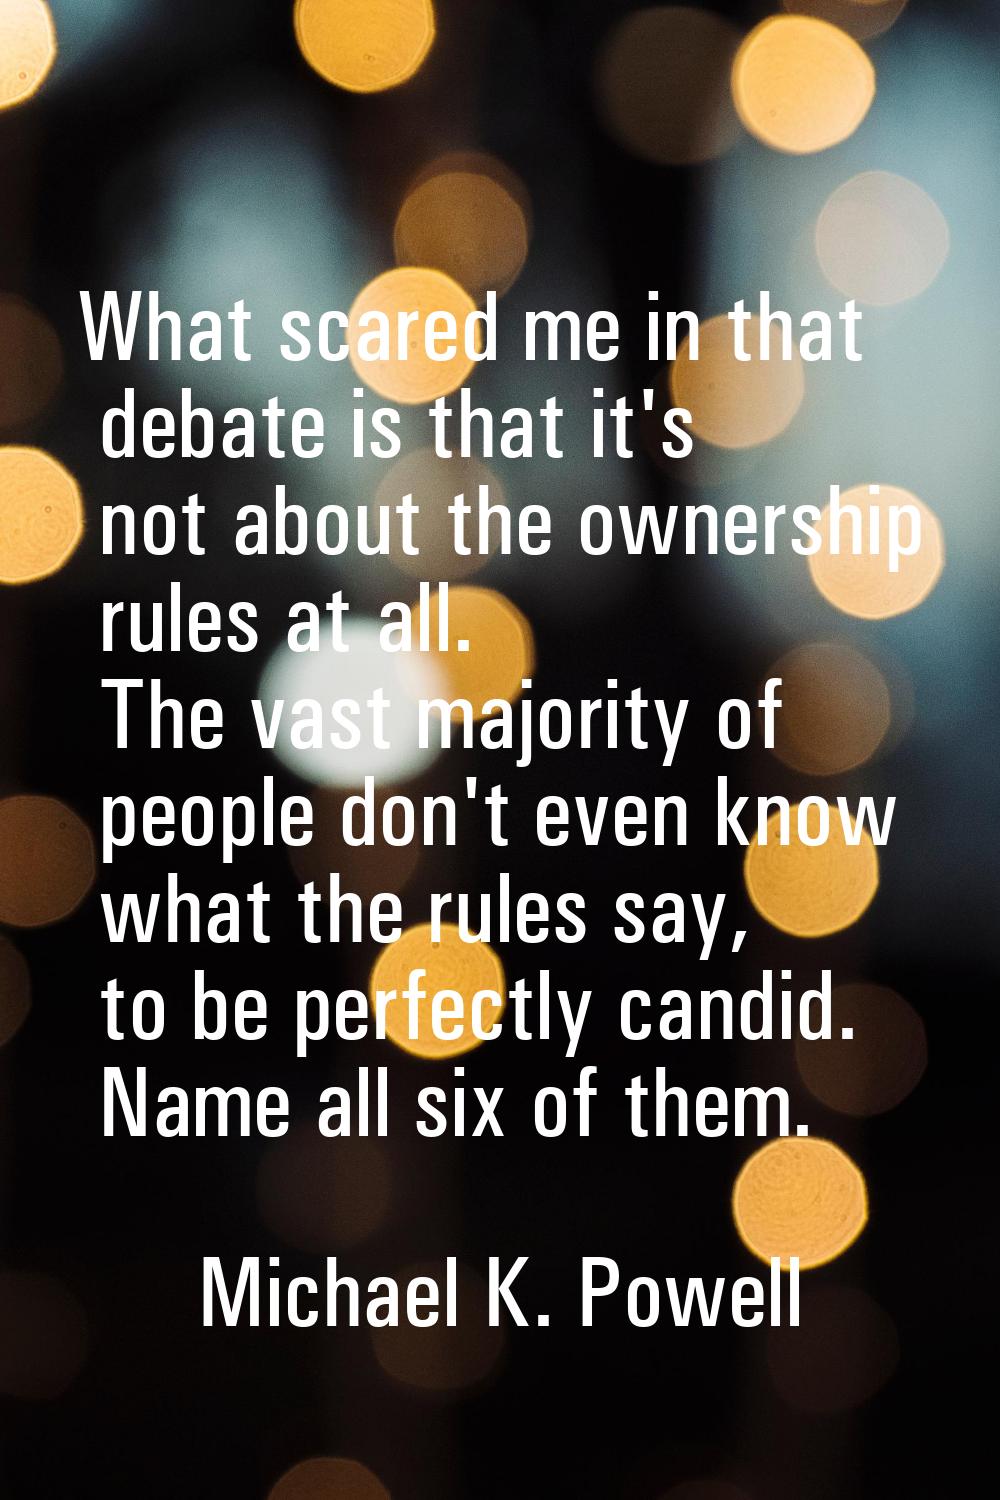 What scared me in that debate is that it's not about the ownership rules at all. The vast majority 